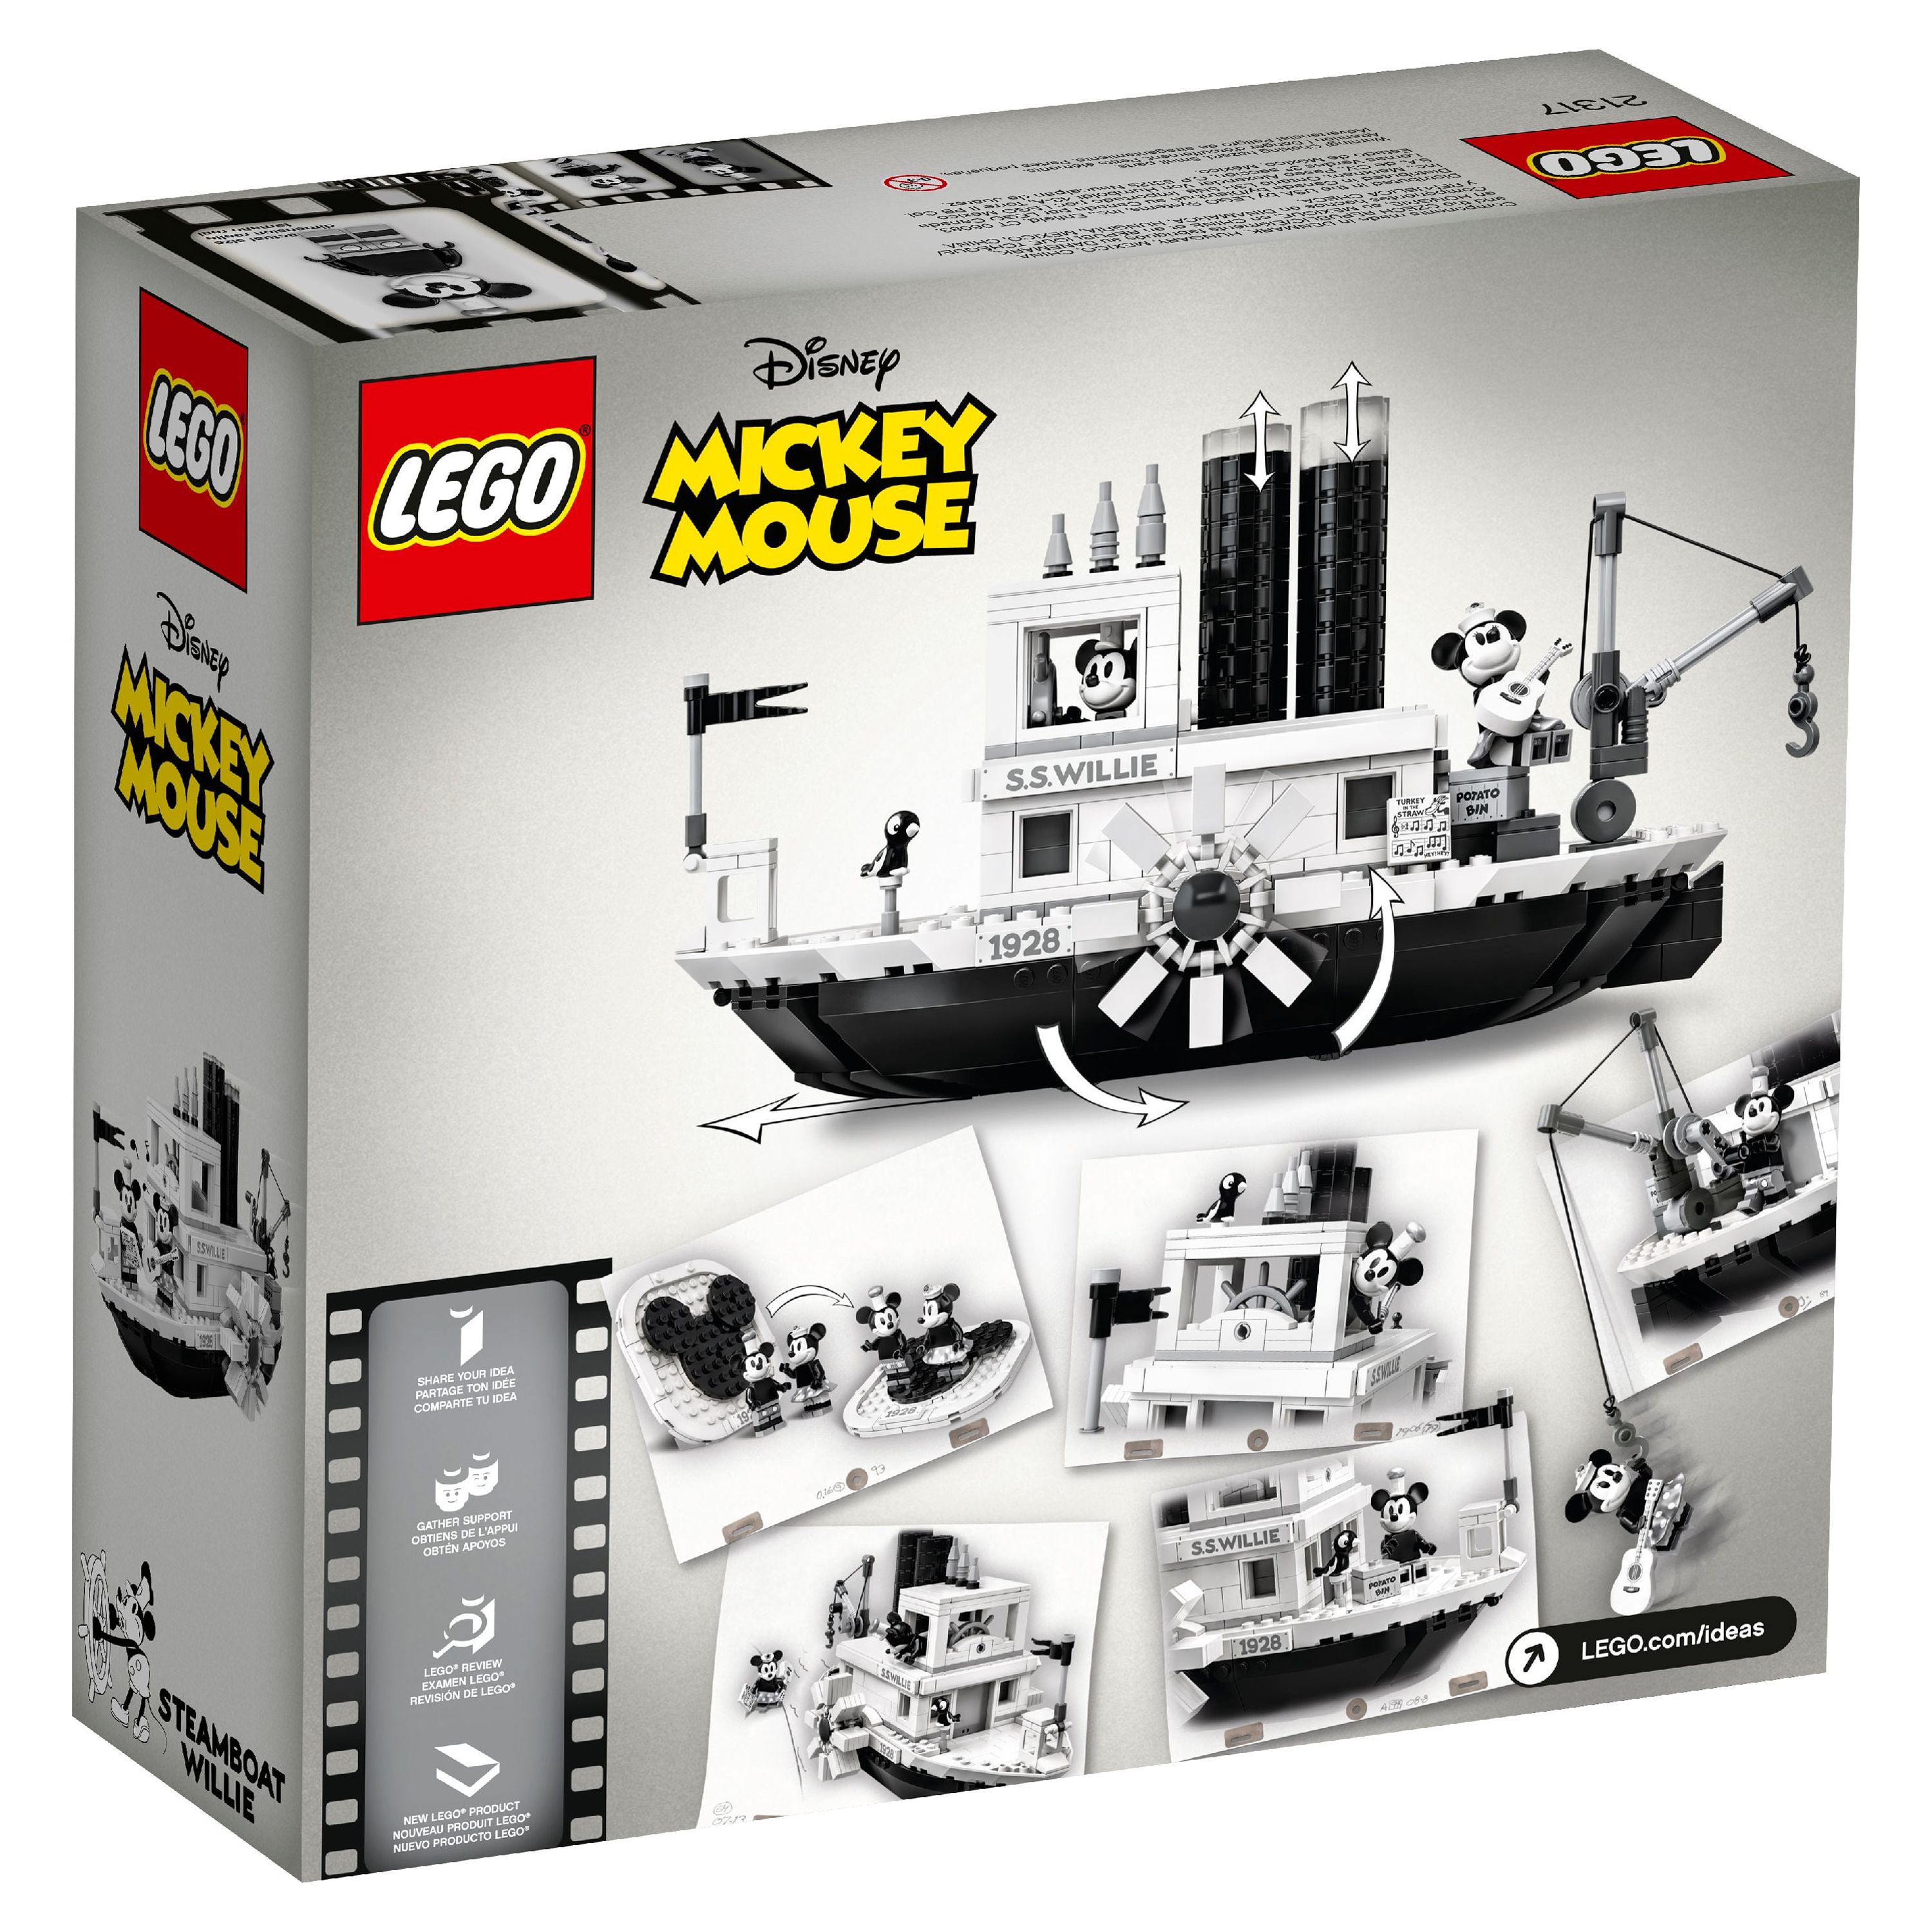 LEGO Ideas Steamboat Willie 21317 - image 5 of 7